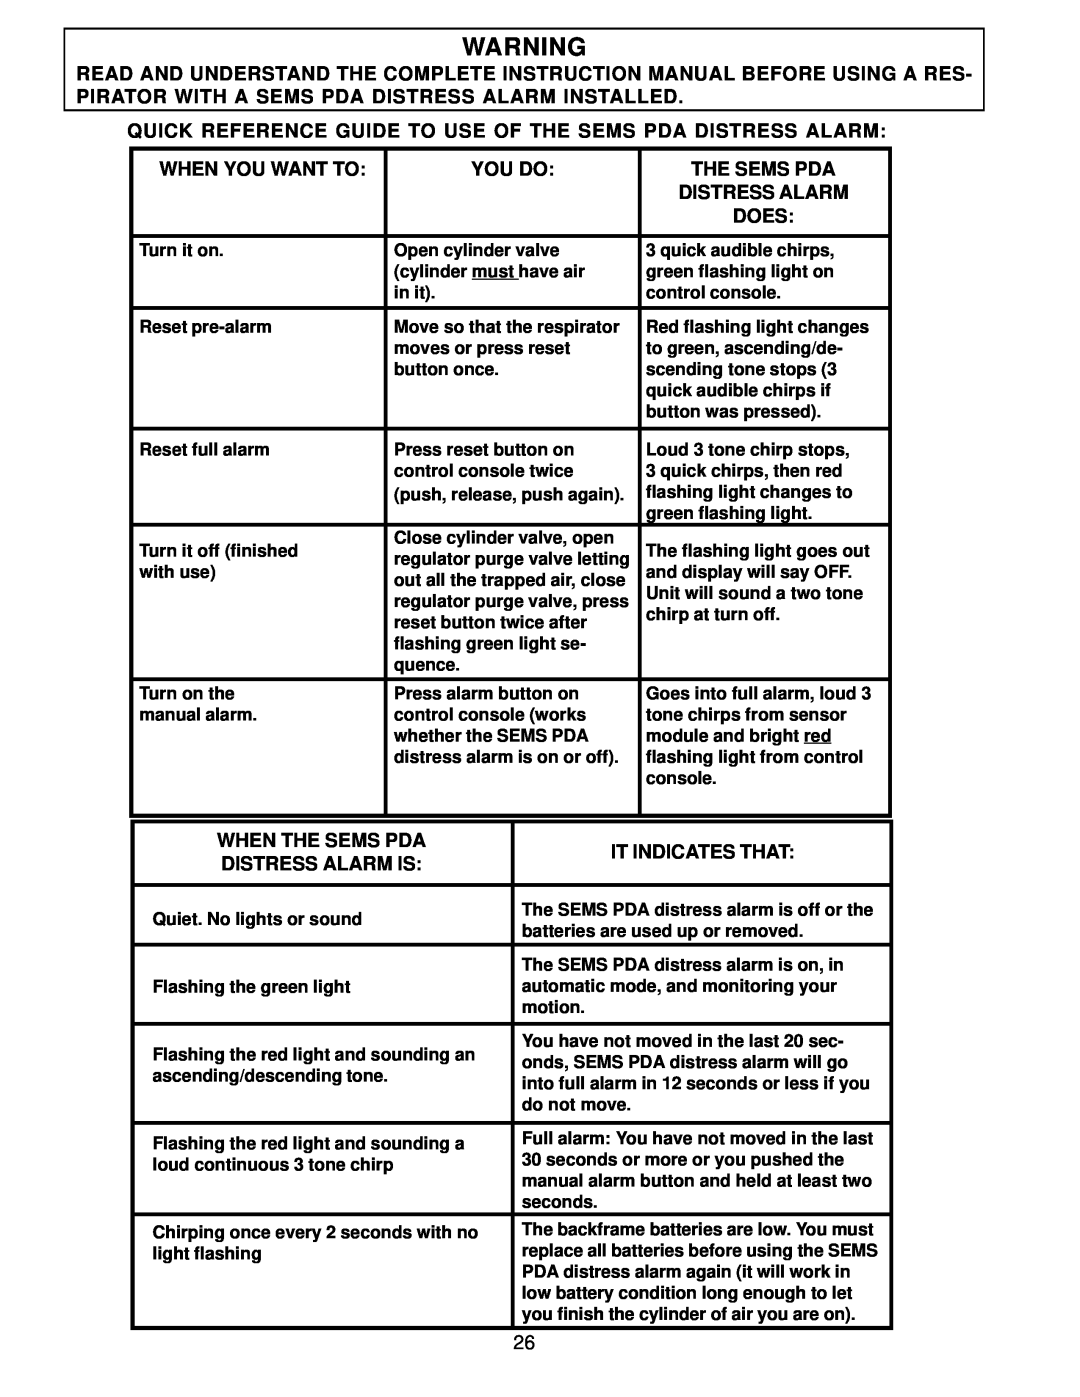 Scott 2.2 Quick Reference Guide To Use Of The Sems Pda Distress Alarm, When You Want To, You Do, When The Sems Pda, Does 